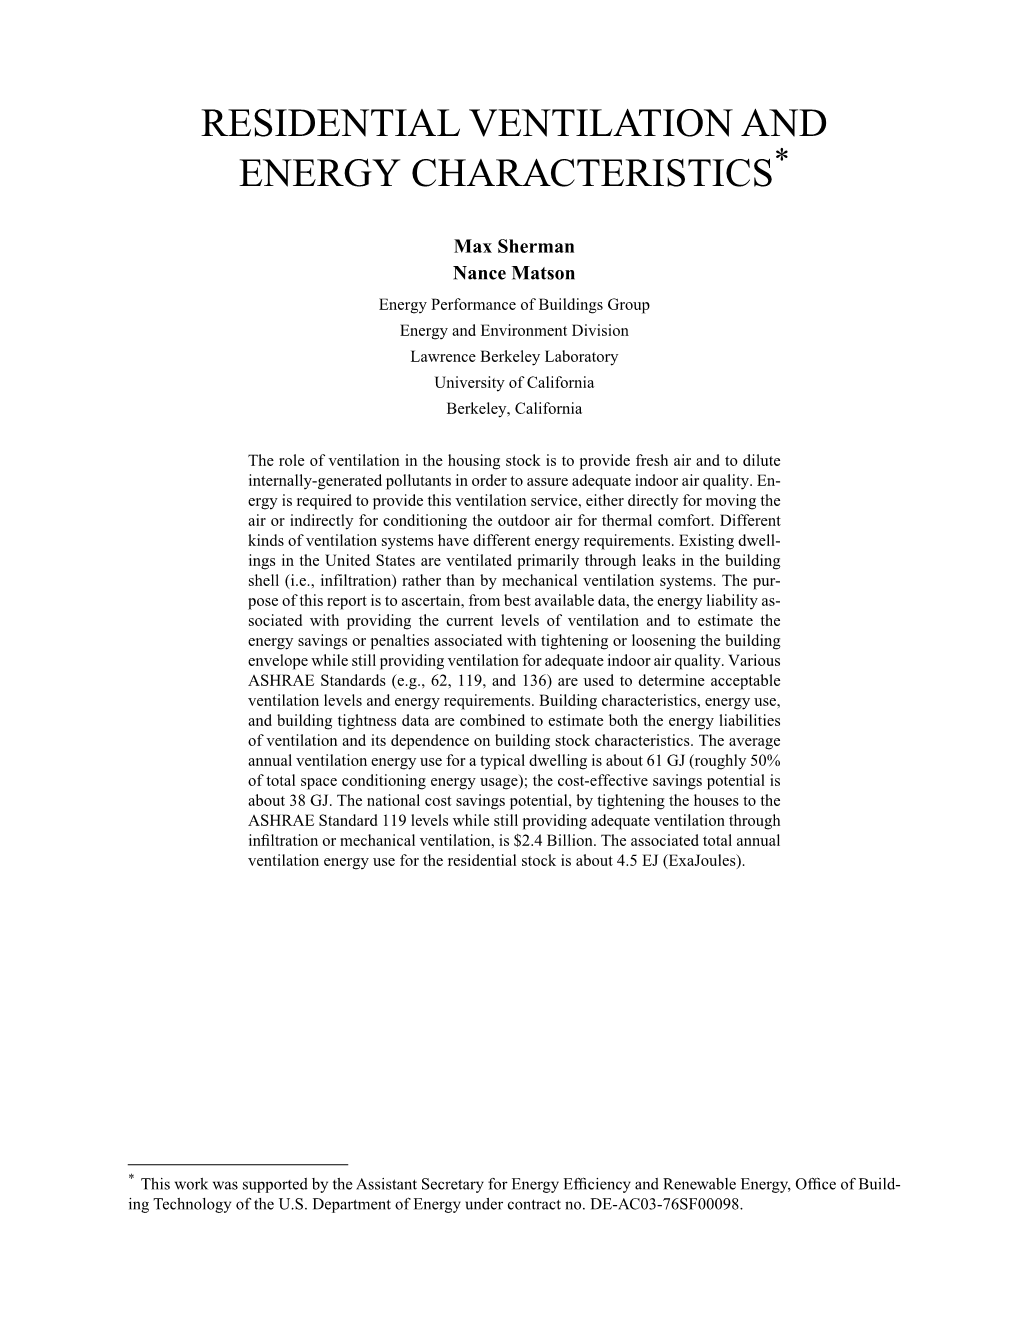 Residential Ventilation and Energy Characteristics*